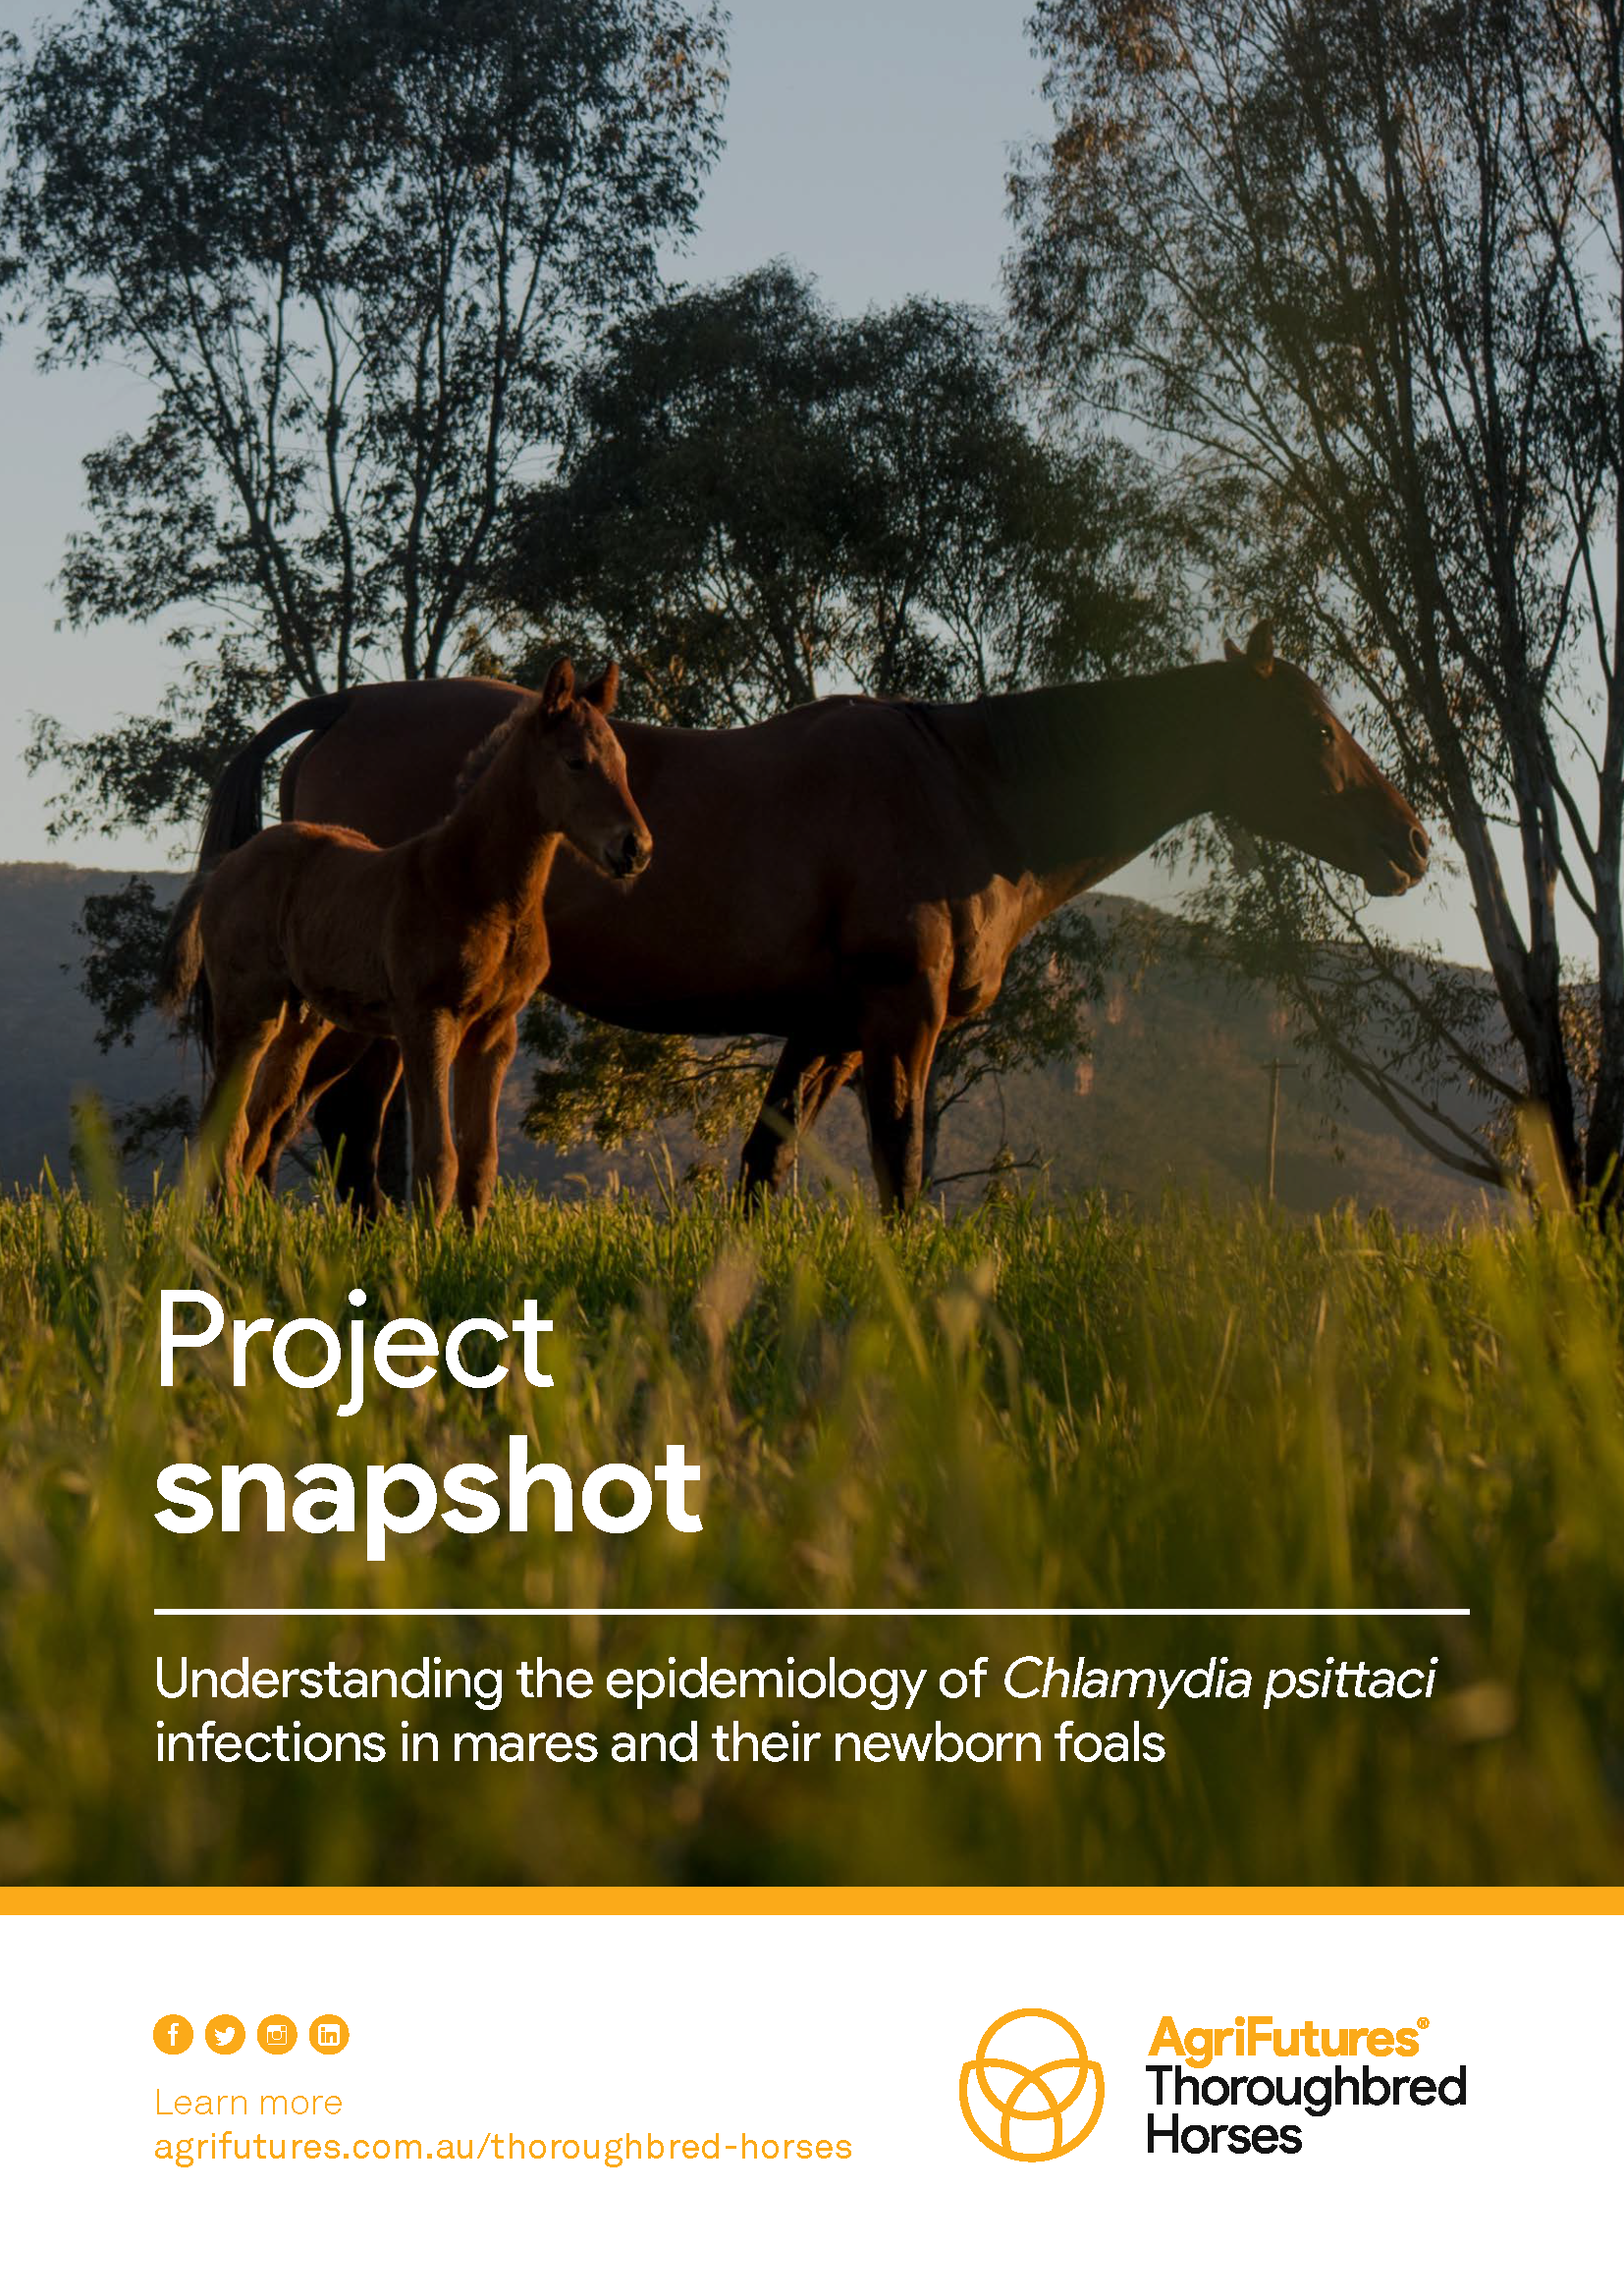 Project snapshot: Understanding the epidemiology of Chlamydia psittaci infections in mares and their newborn foals - image